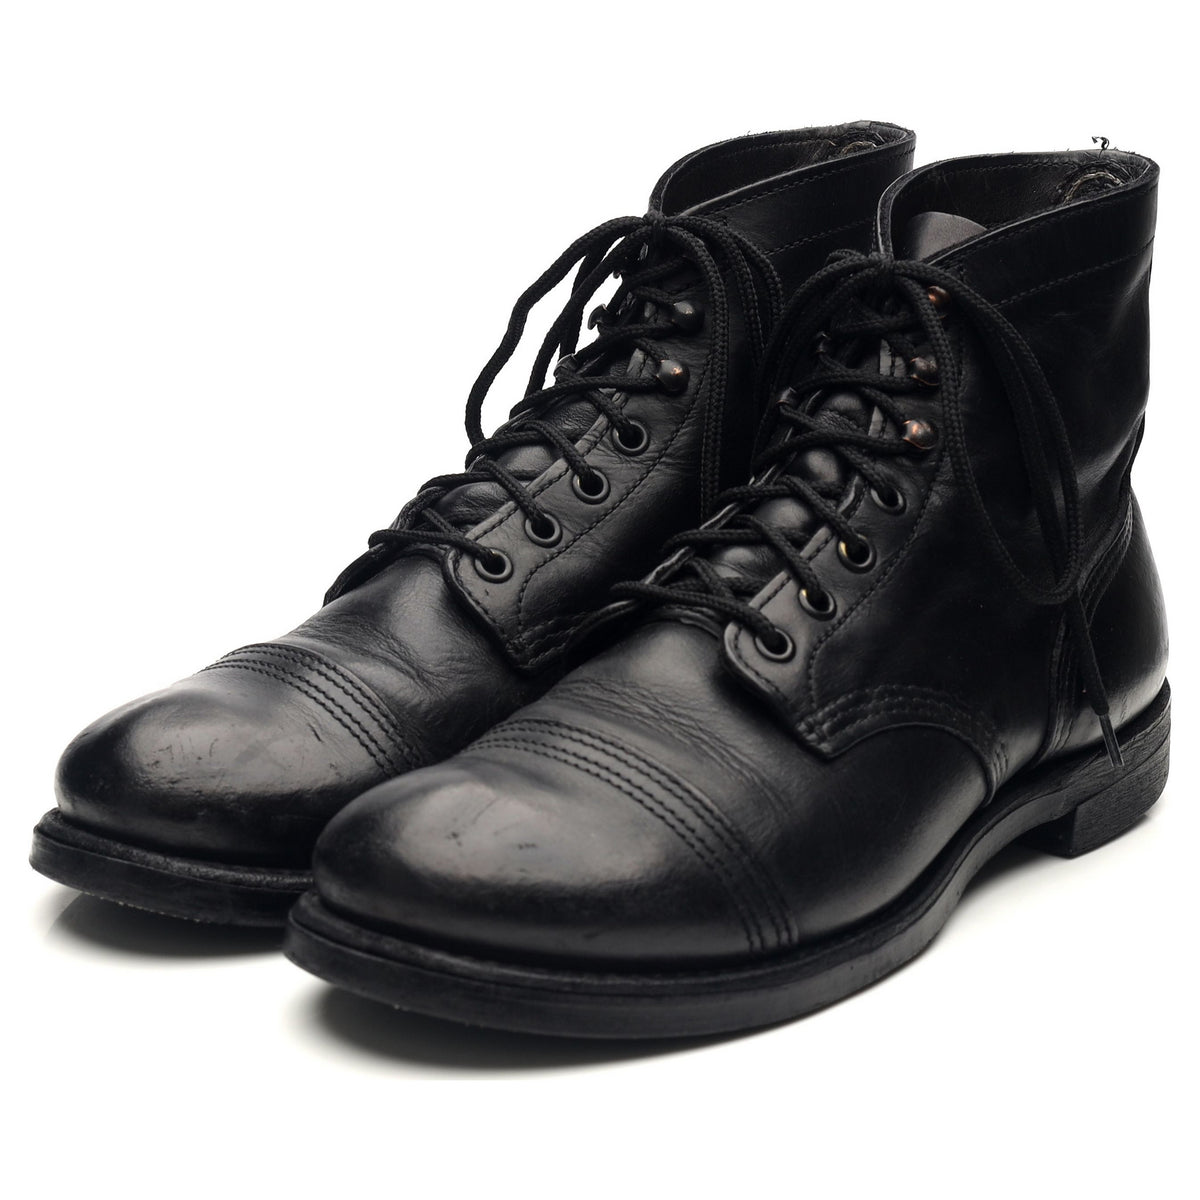 Black Leather Iron Ranger Boots UK 6.5 - Abbot's Shoes